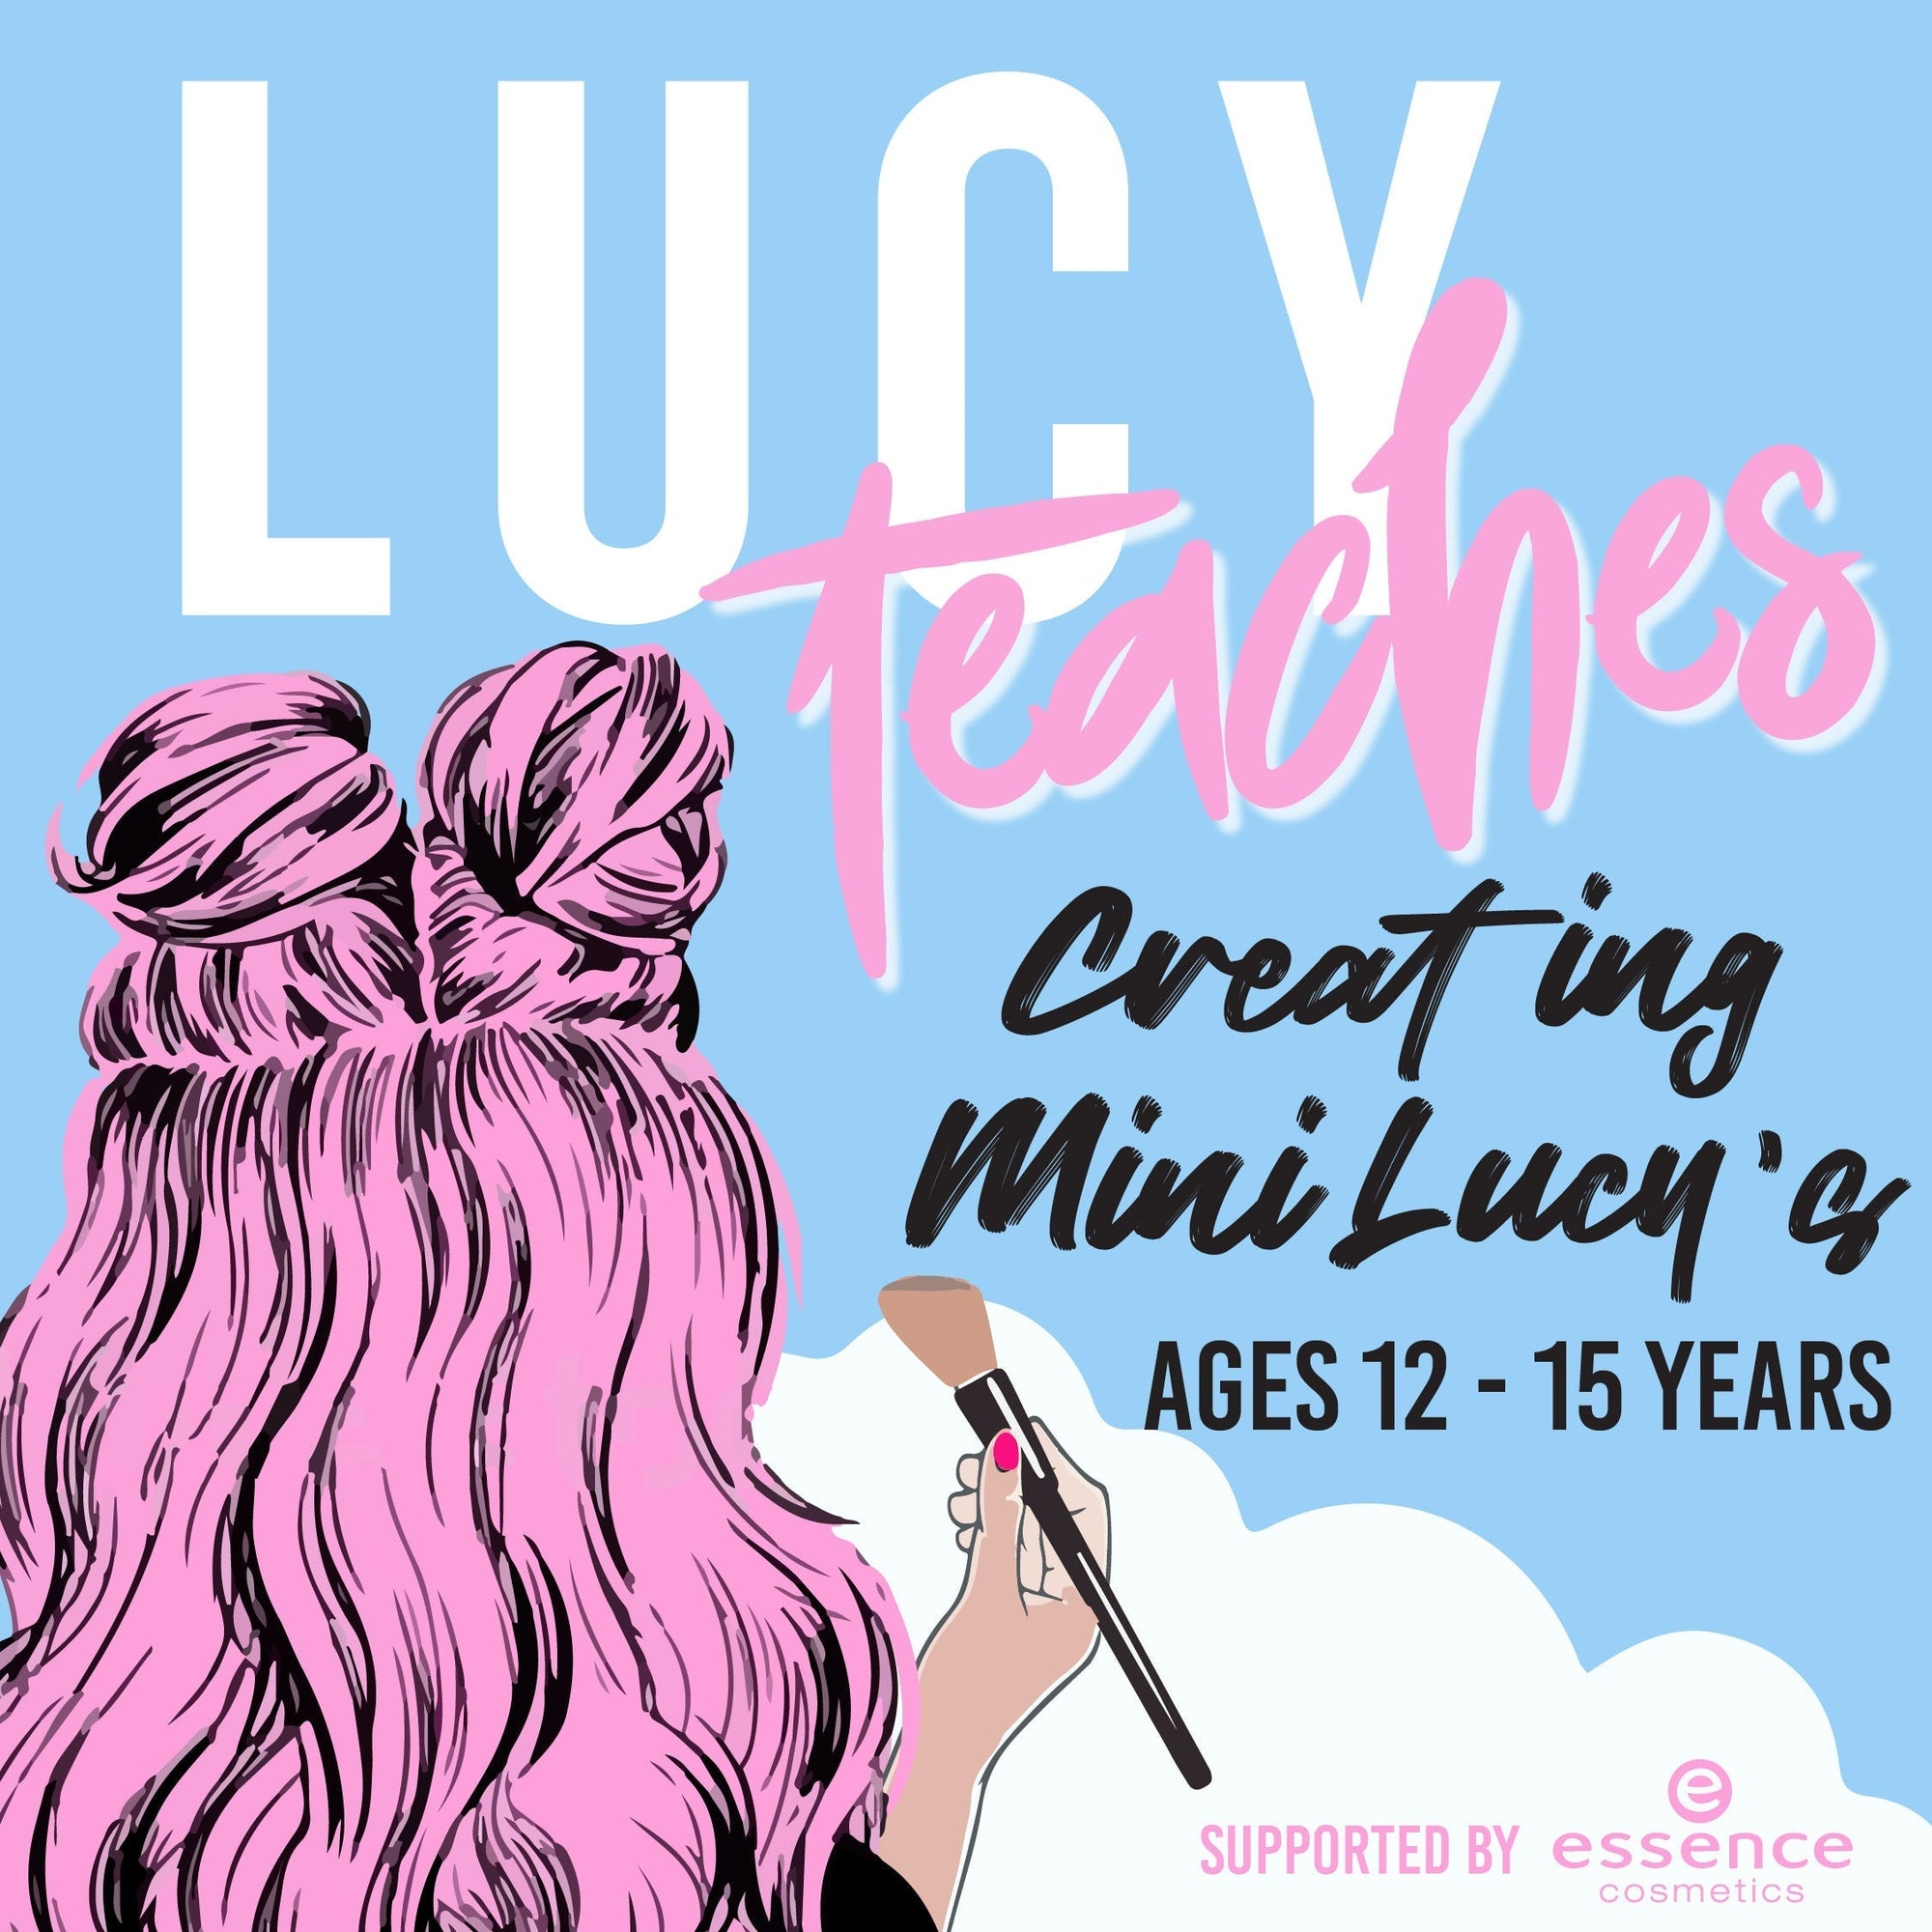 Lucy Teaches: Children's Beauty Workshop for Beginners (Teens - 12-15 Years Old) | June